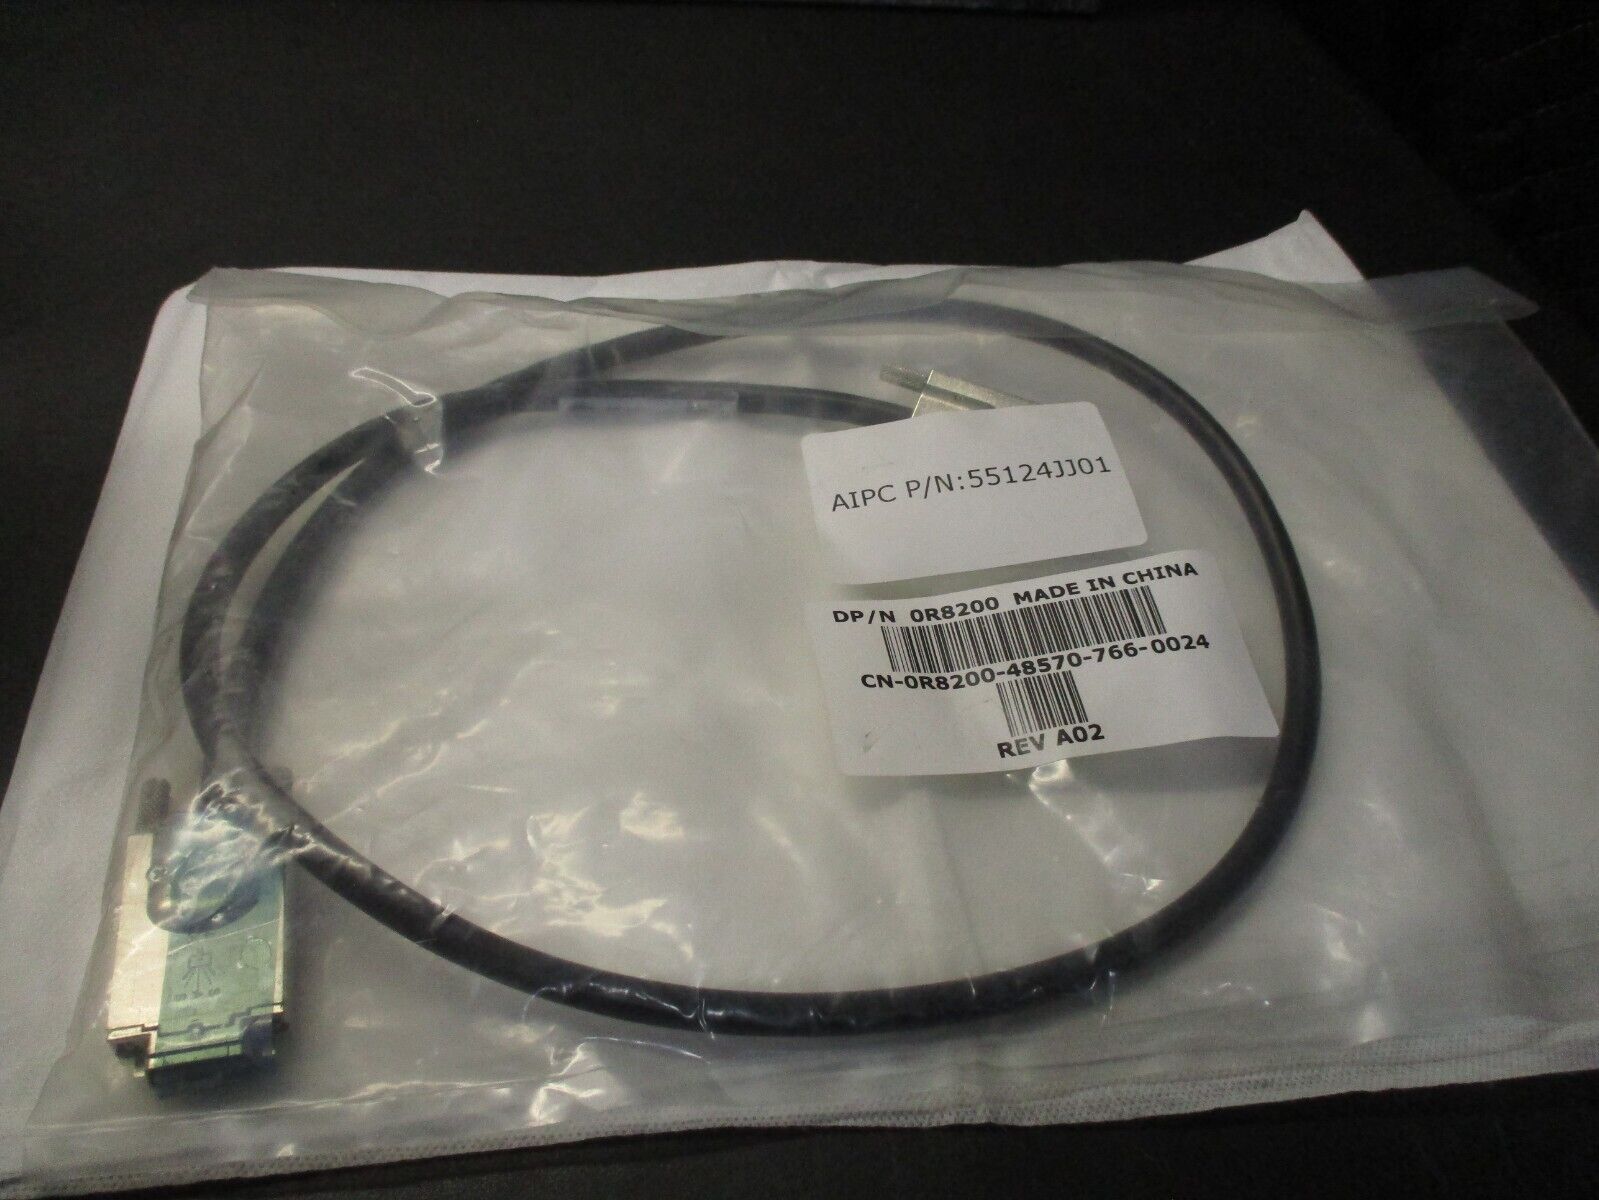 NEW Dell PowerVault External SAS Cable 1 Meter 0R8200